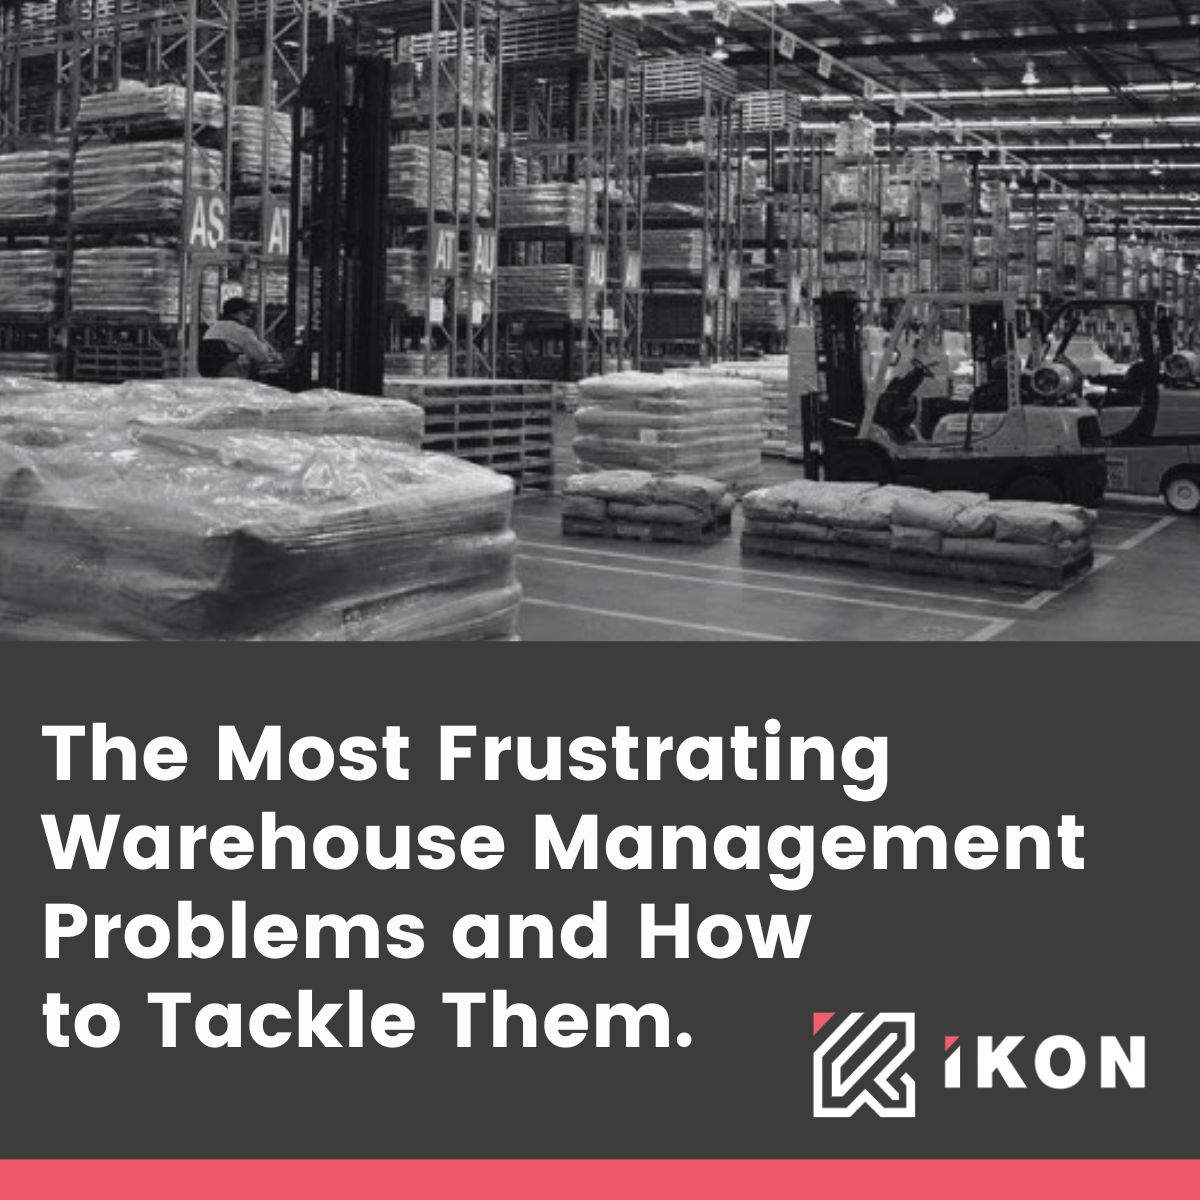 FRUSTRATING WAREHOUSE MANAGEMENT PROBLEMS AND HOW TO TACKLE THEM